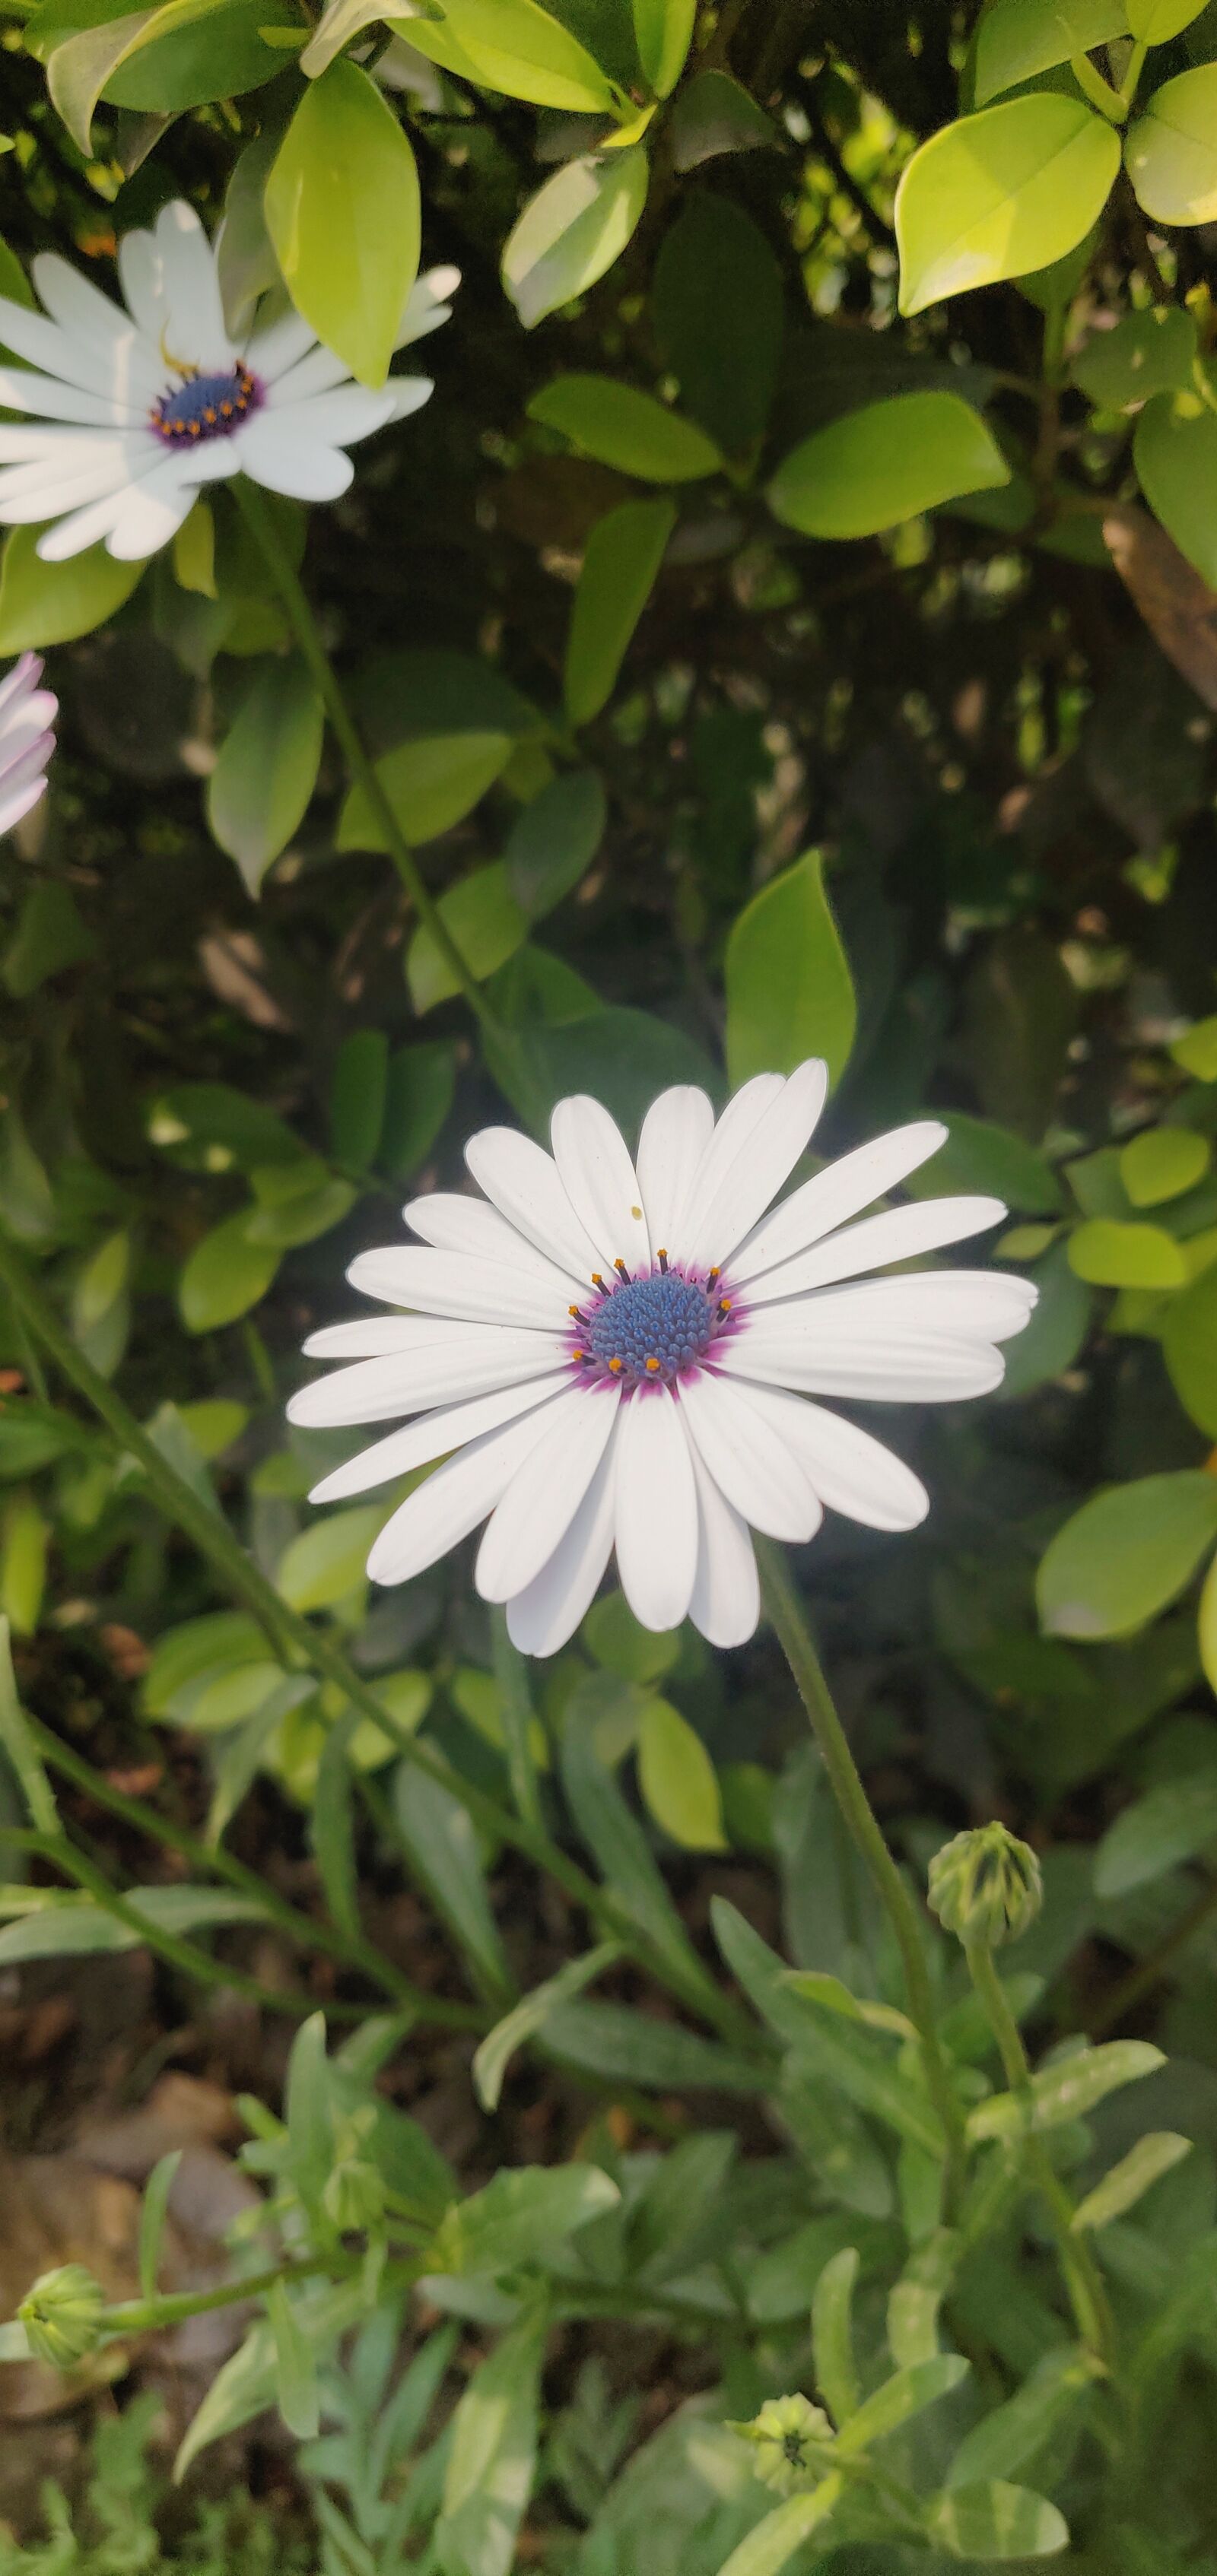 OnePlus A6000 sample photo. Flower, daisy, spring photography